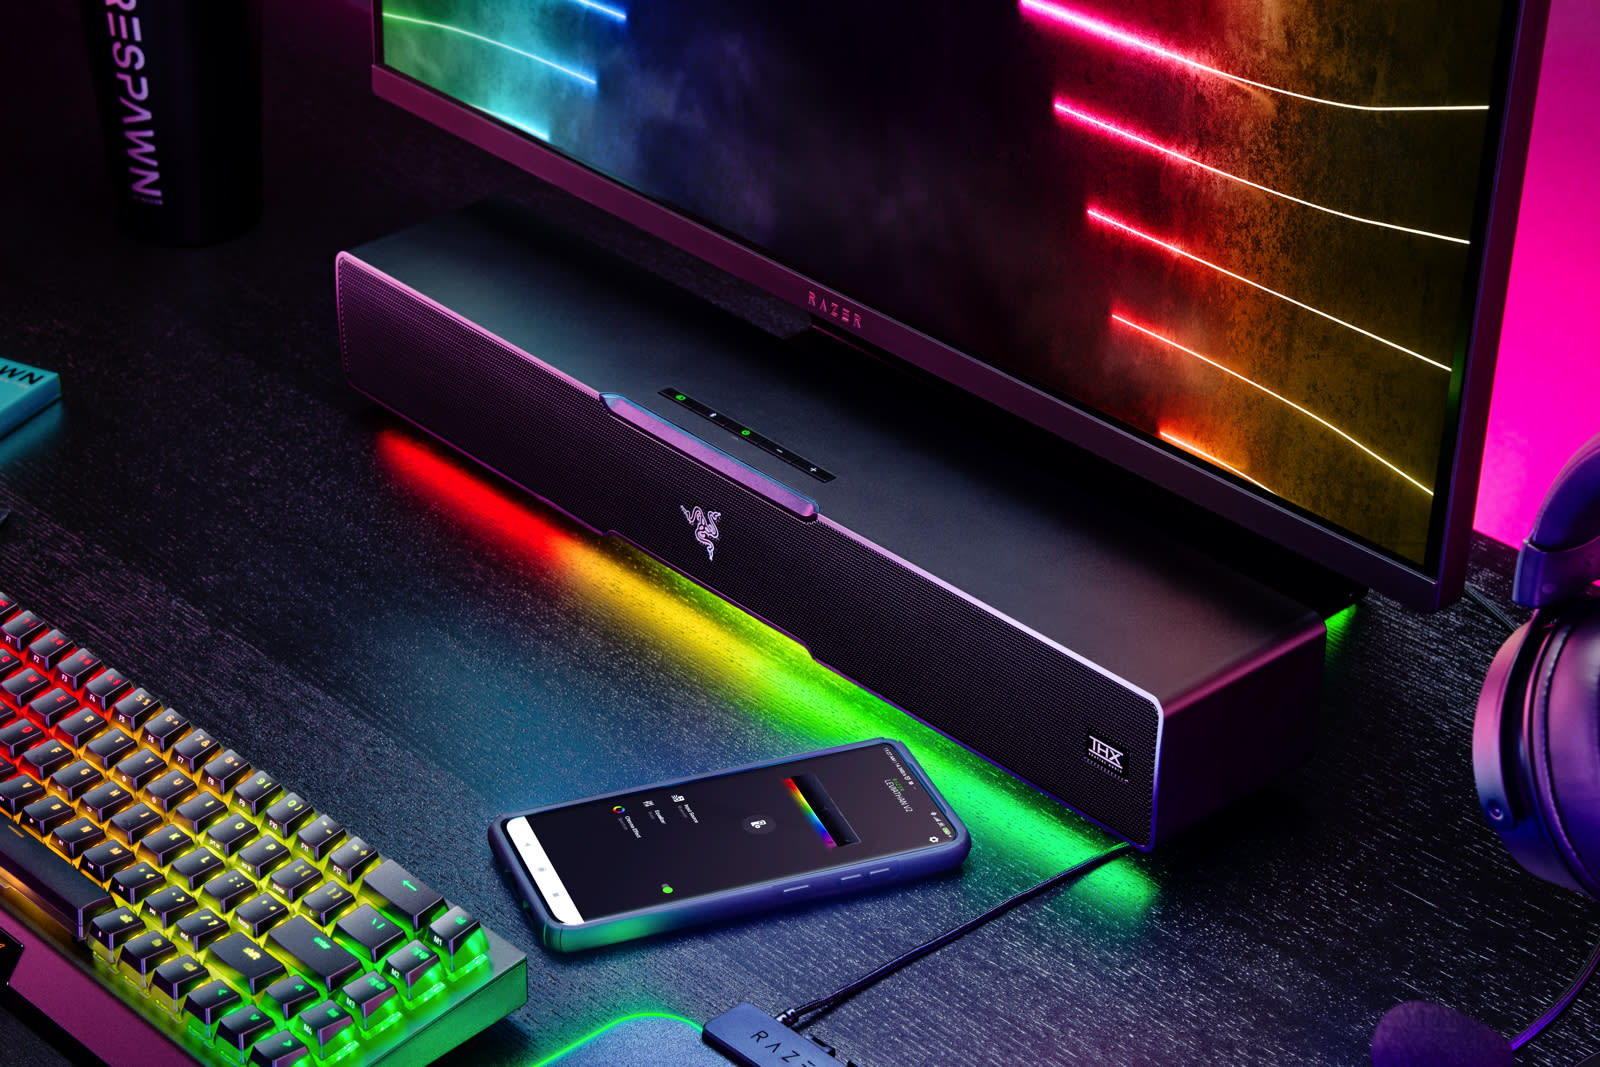 Razer Leviathan V2 on a table in a dark room, with a phone next to it